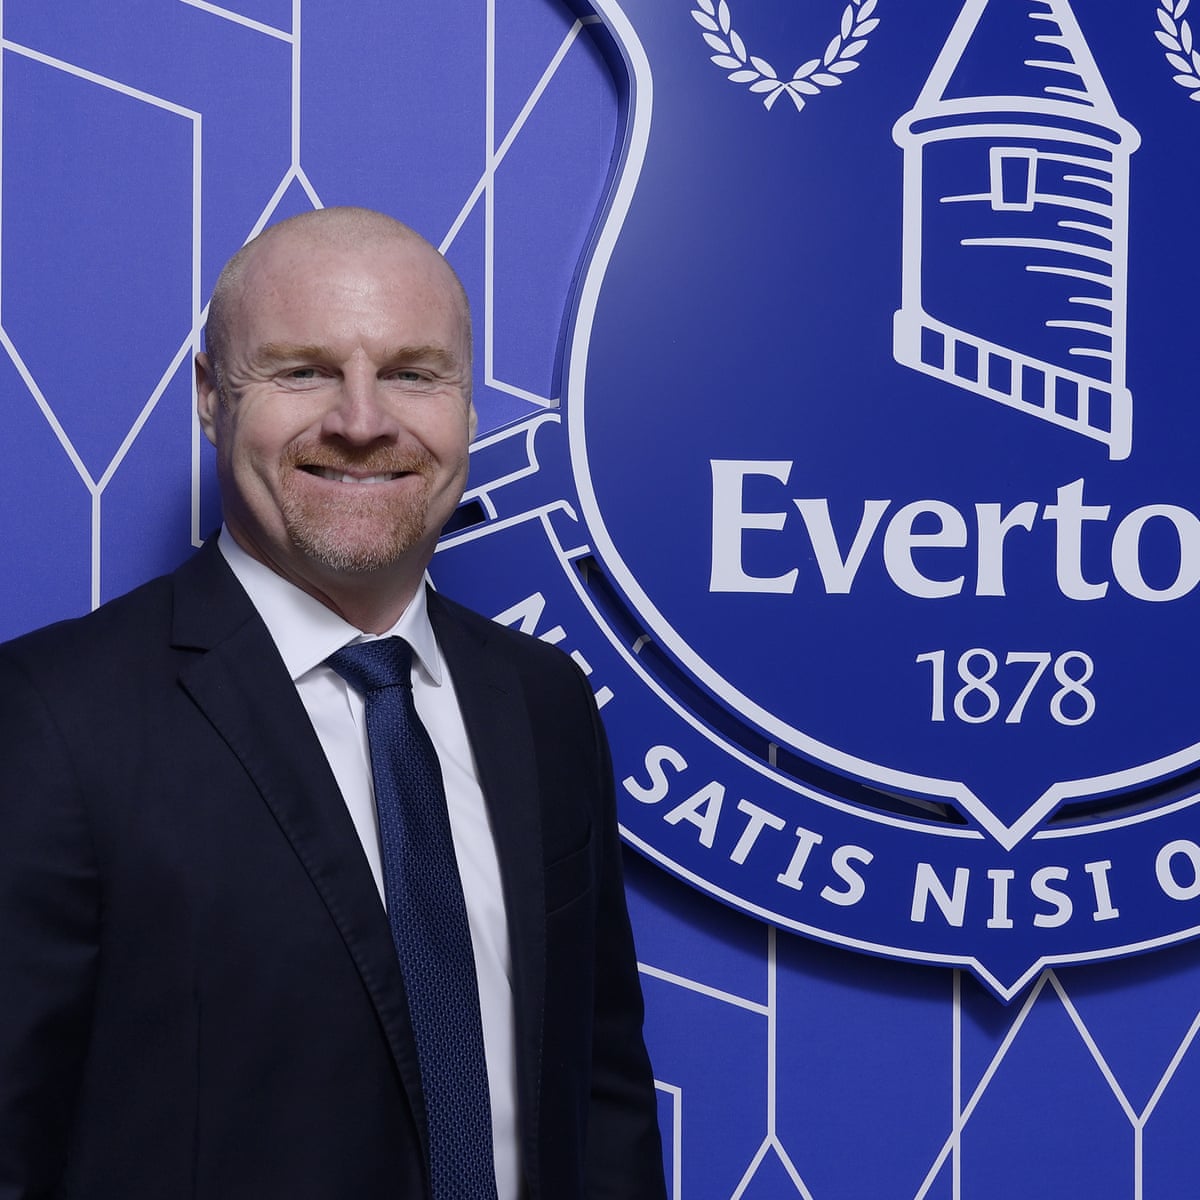 Everton don put Sean Dyche as new manager